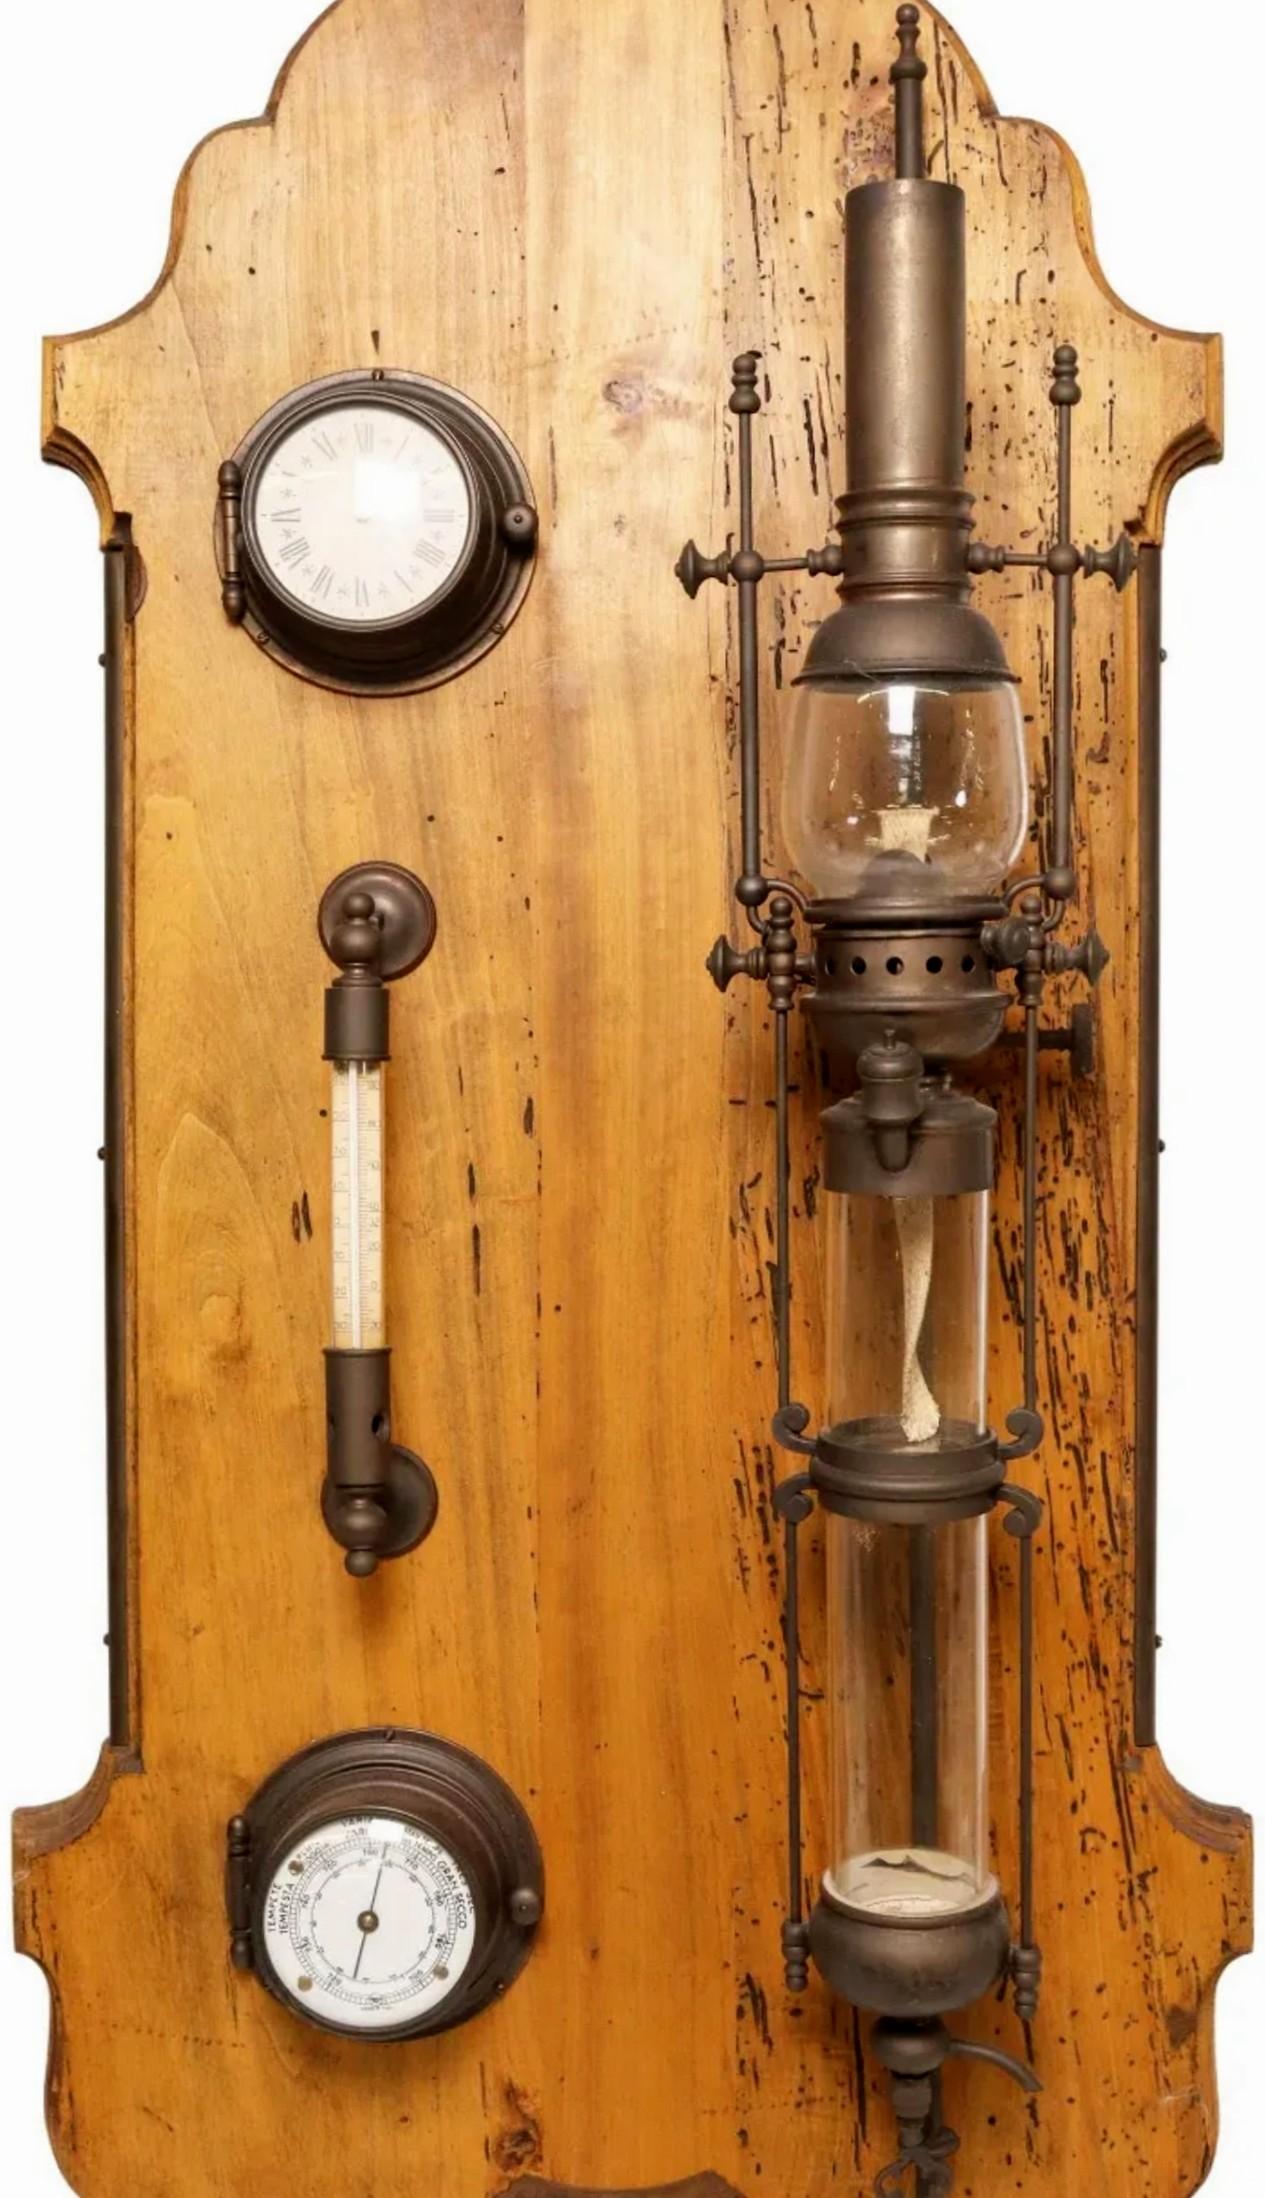 A decorative frigate warship lantern, thermometer, and barometer, mounted on a shaped wood back board, with later metal plaque engraved HMS Lydia.

This unique one-of-a-kind sculptural wall object is sure to add a touch of sophisticated antique